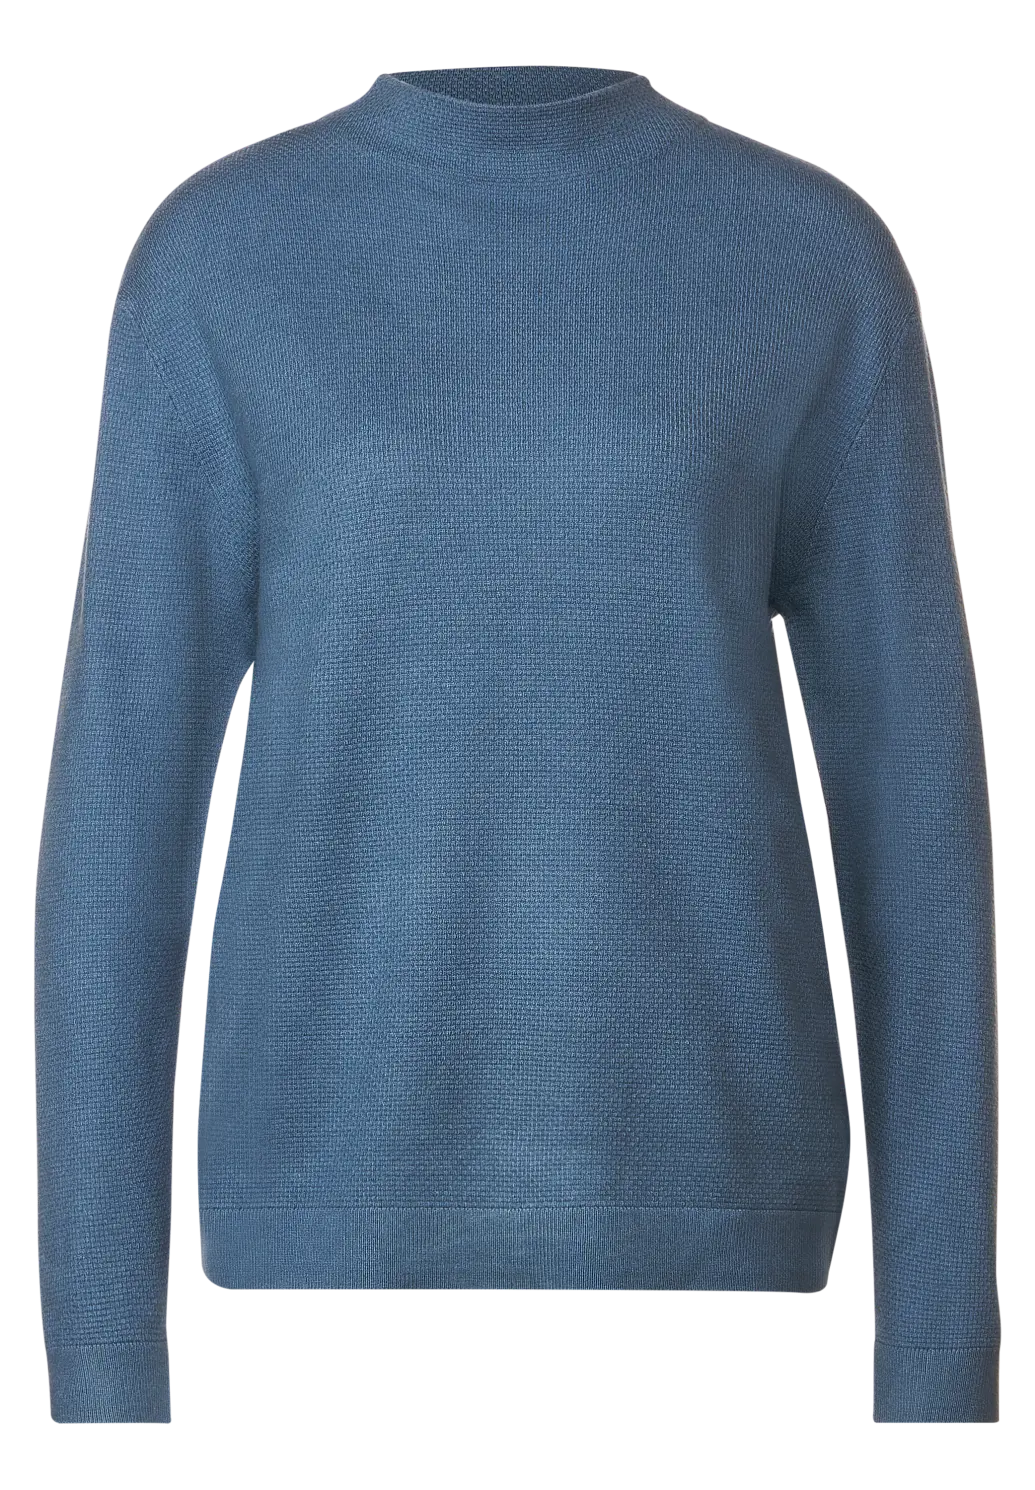 Melange One | Satin - with Knit Blues Blue Jumper Street Structure - Cotton